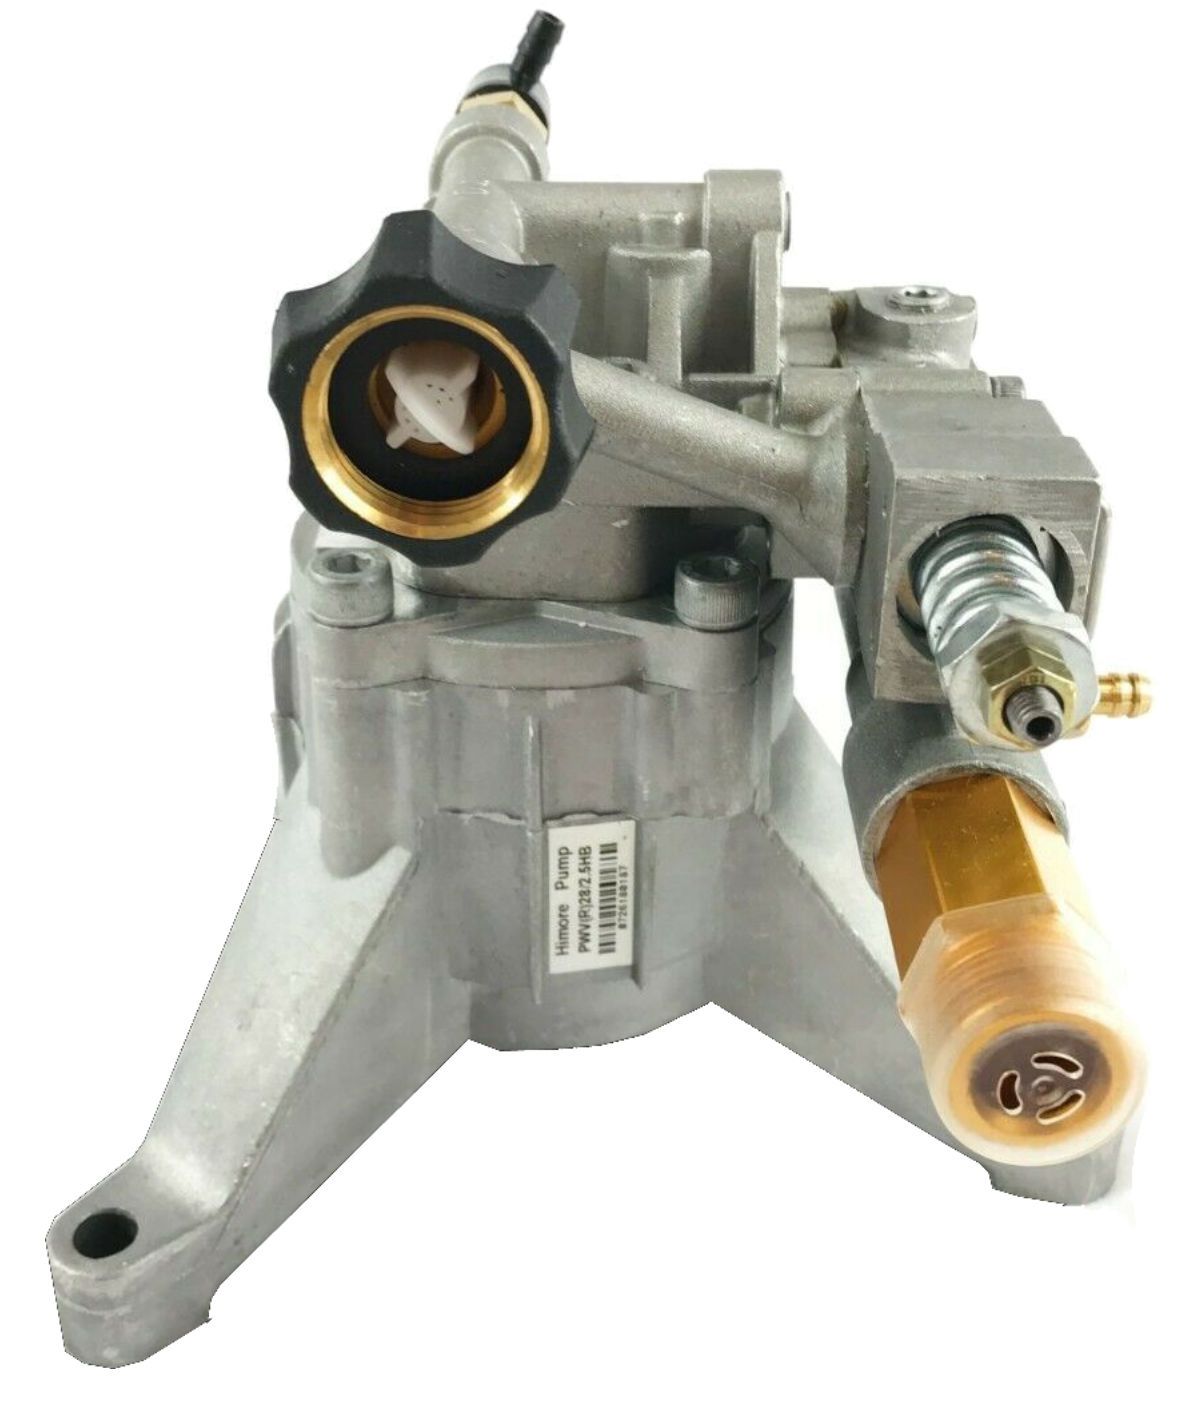 2700 PSI PRESSURE WASHER WATER PUMP Campbell Hausfeld PW2030V2LE - AE-Power